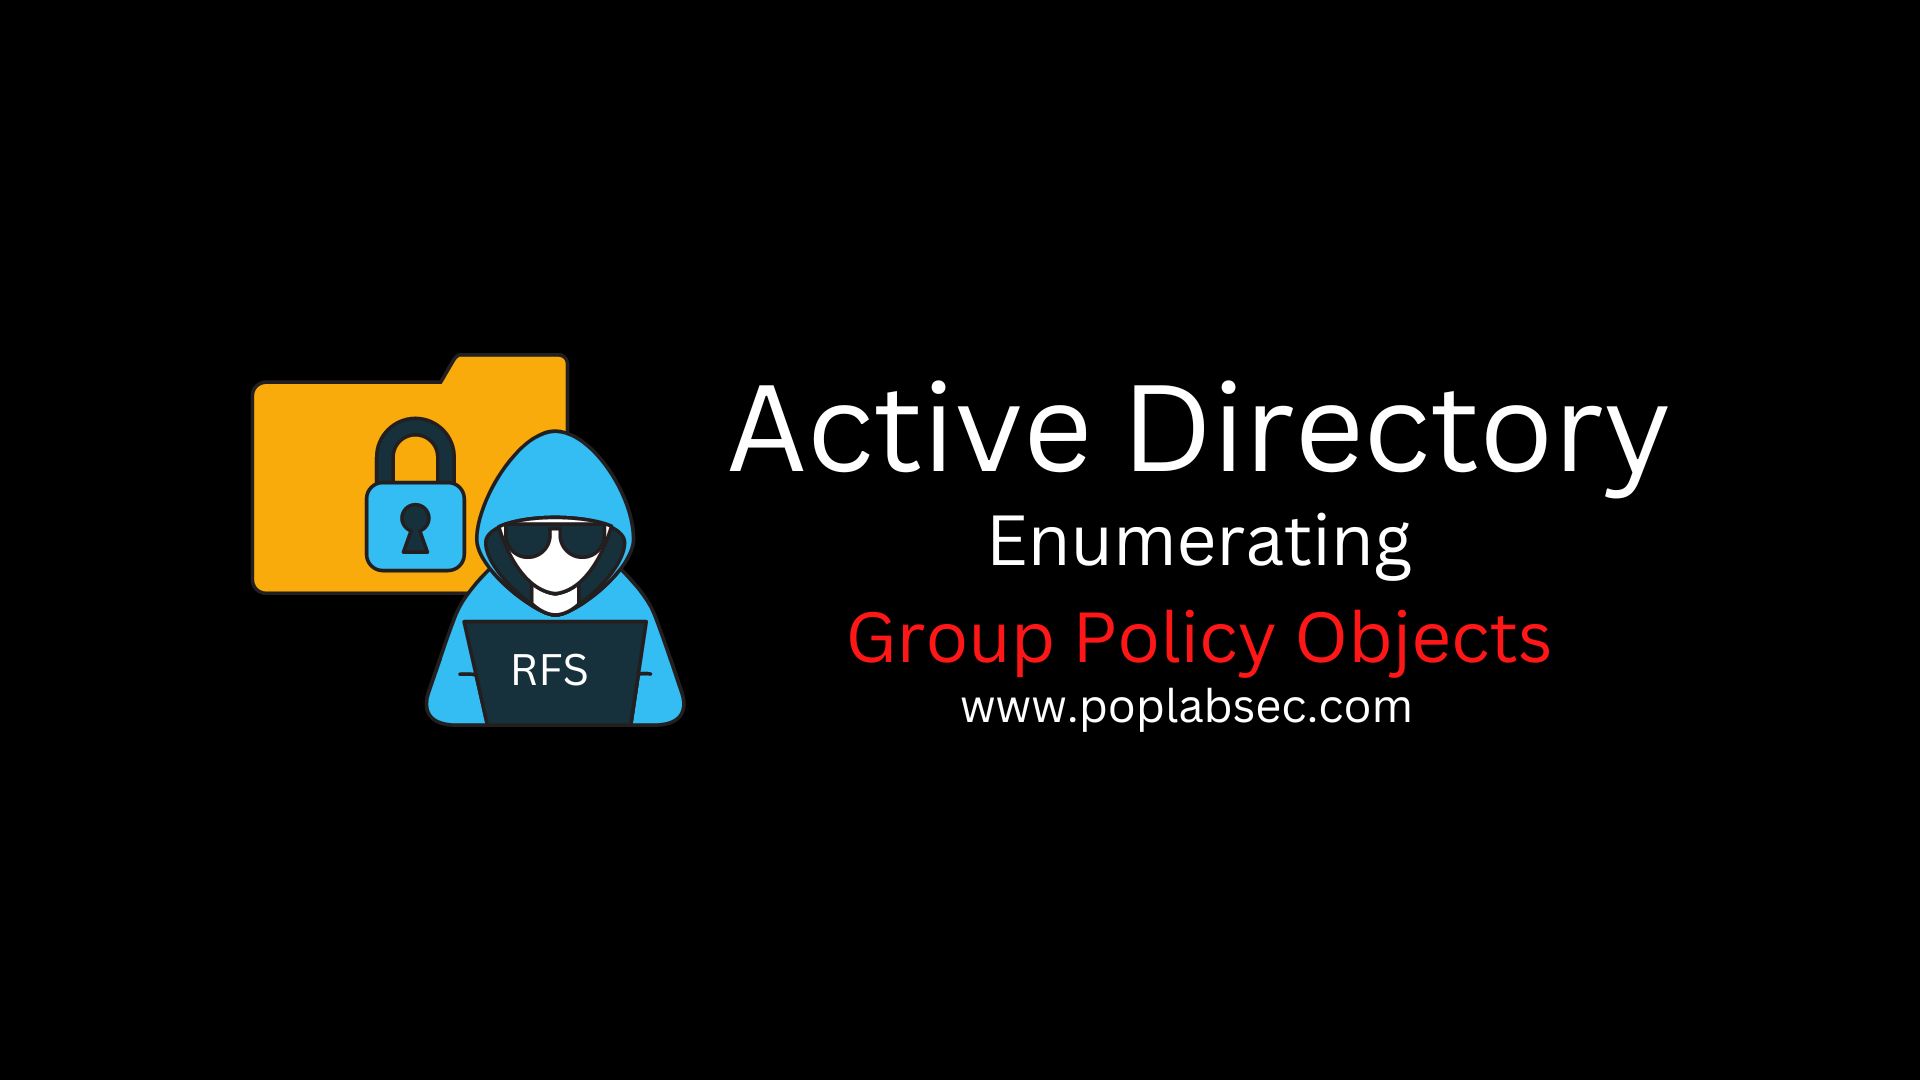 Active Directory Enumerating Group Policy Objects